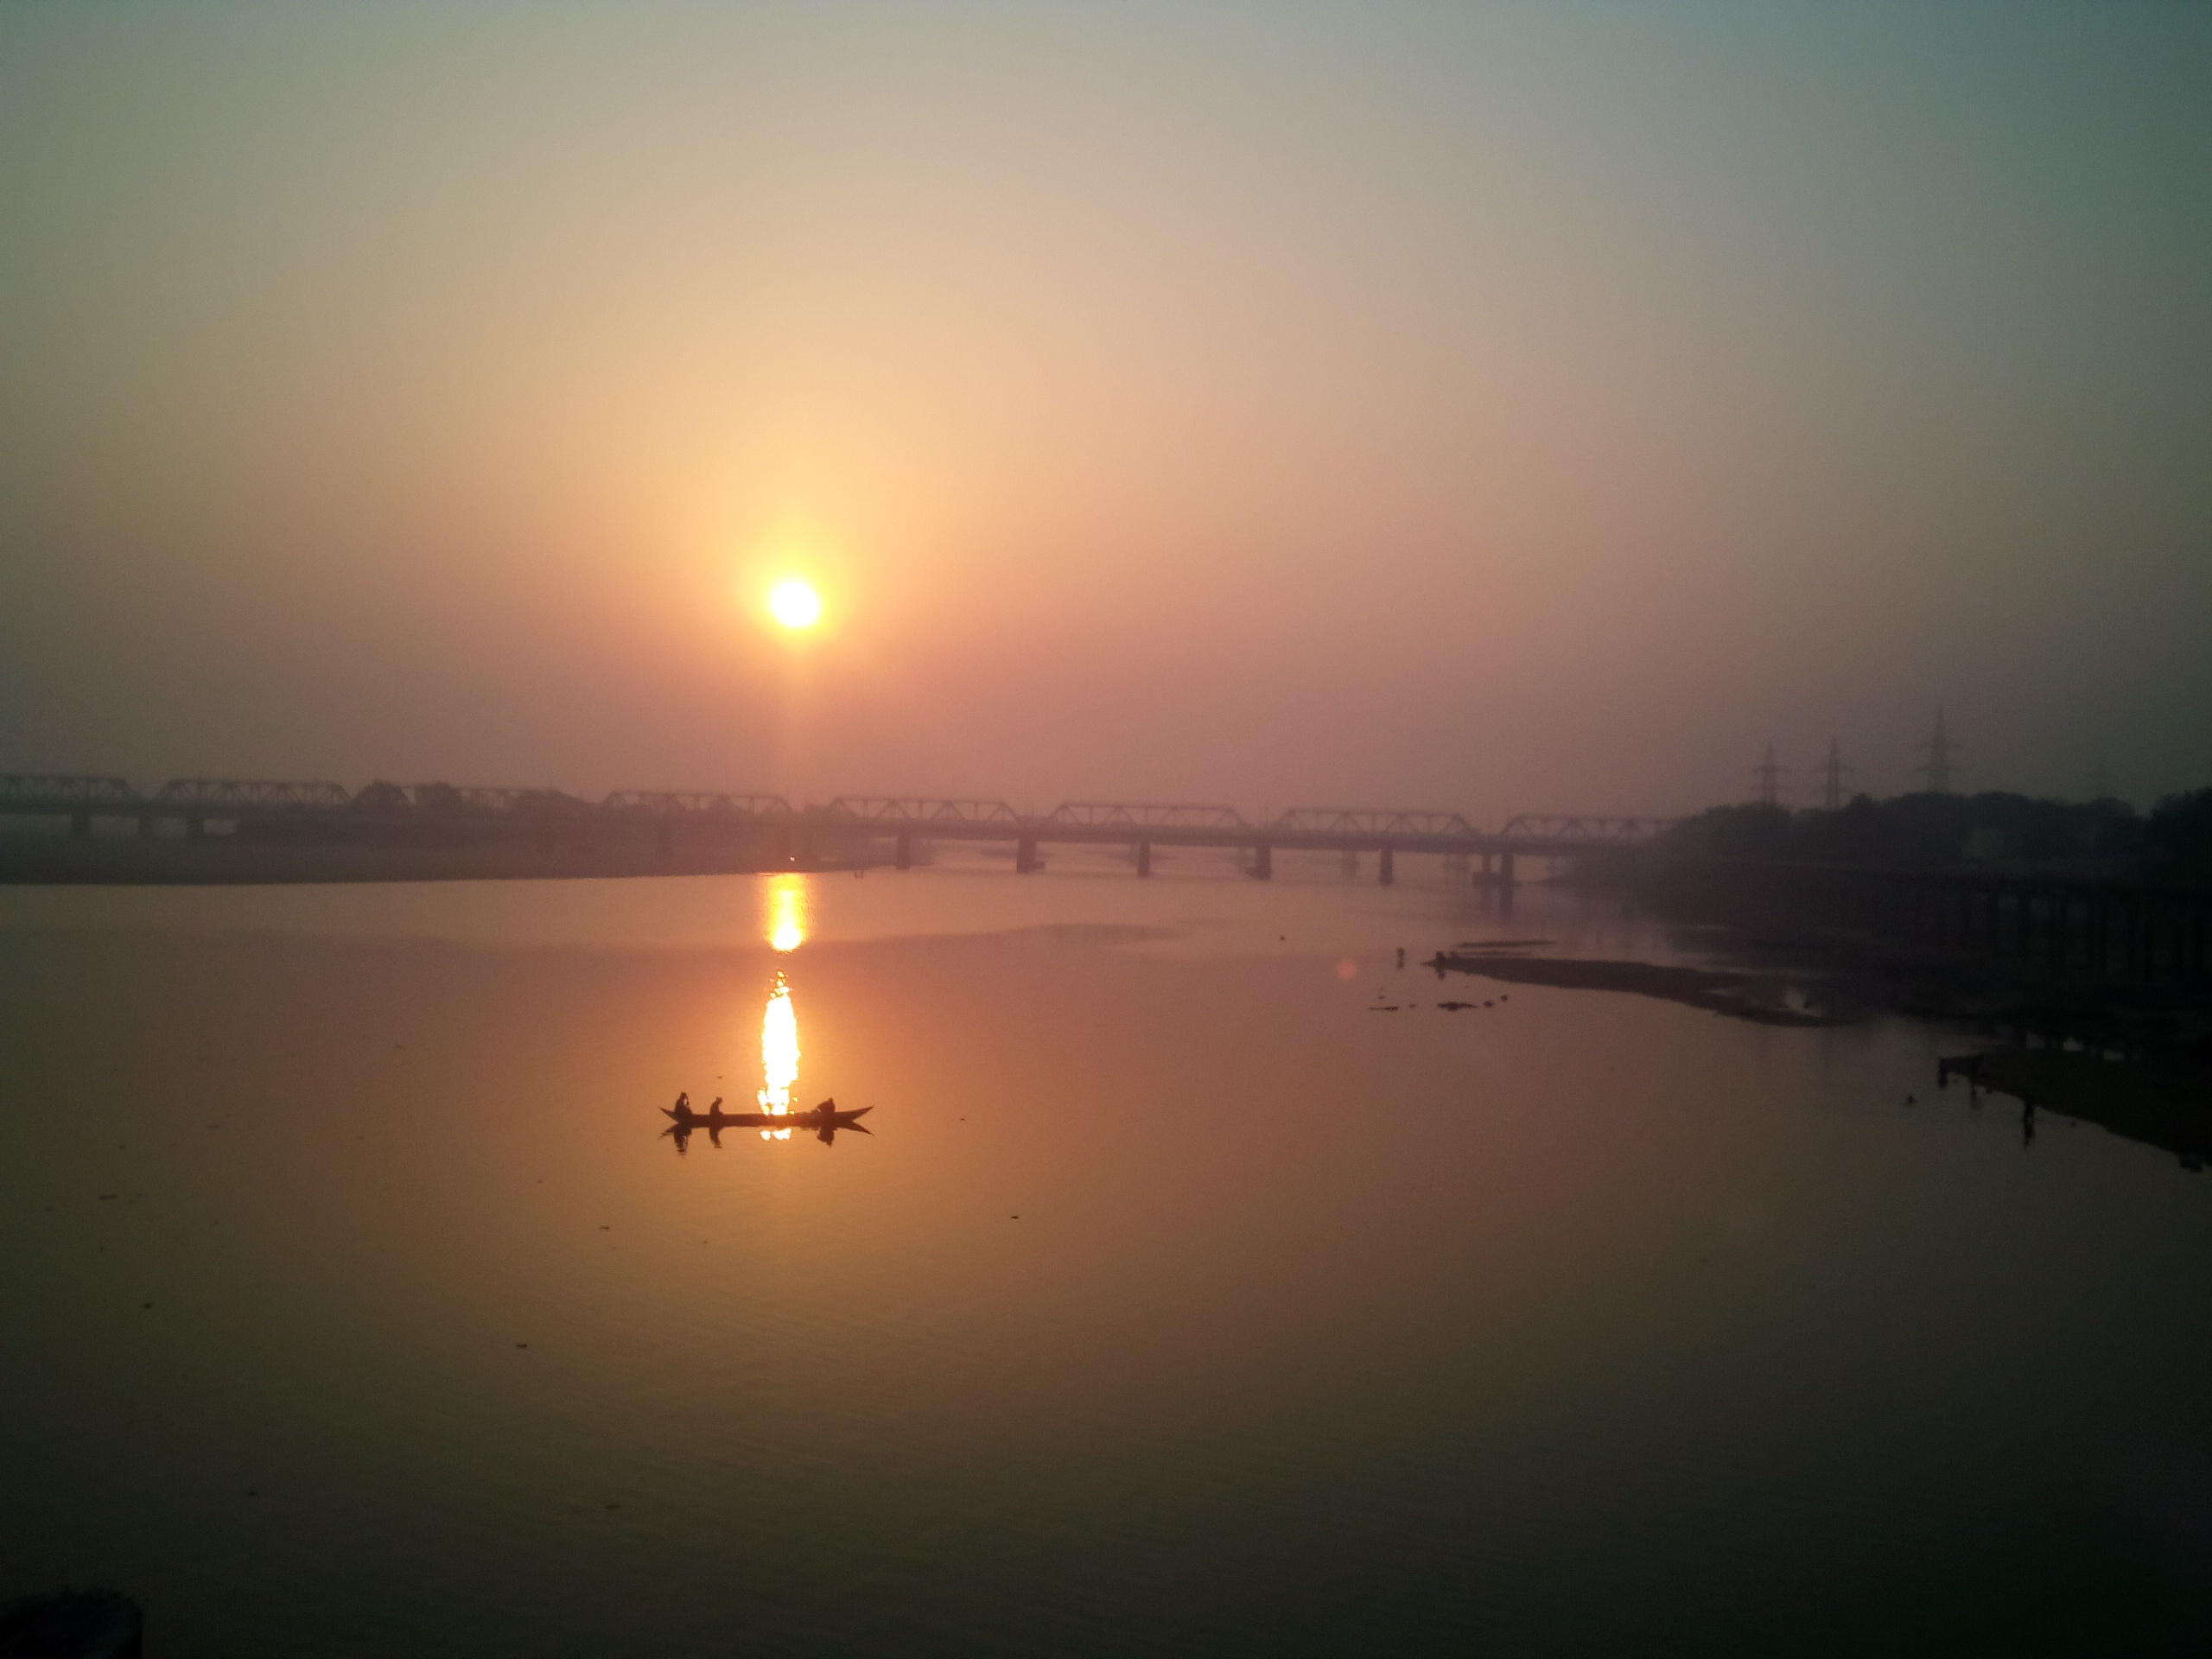 Sunrise Picture by Biswa890